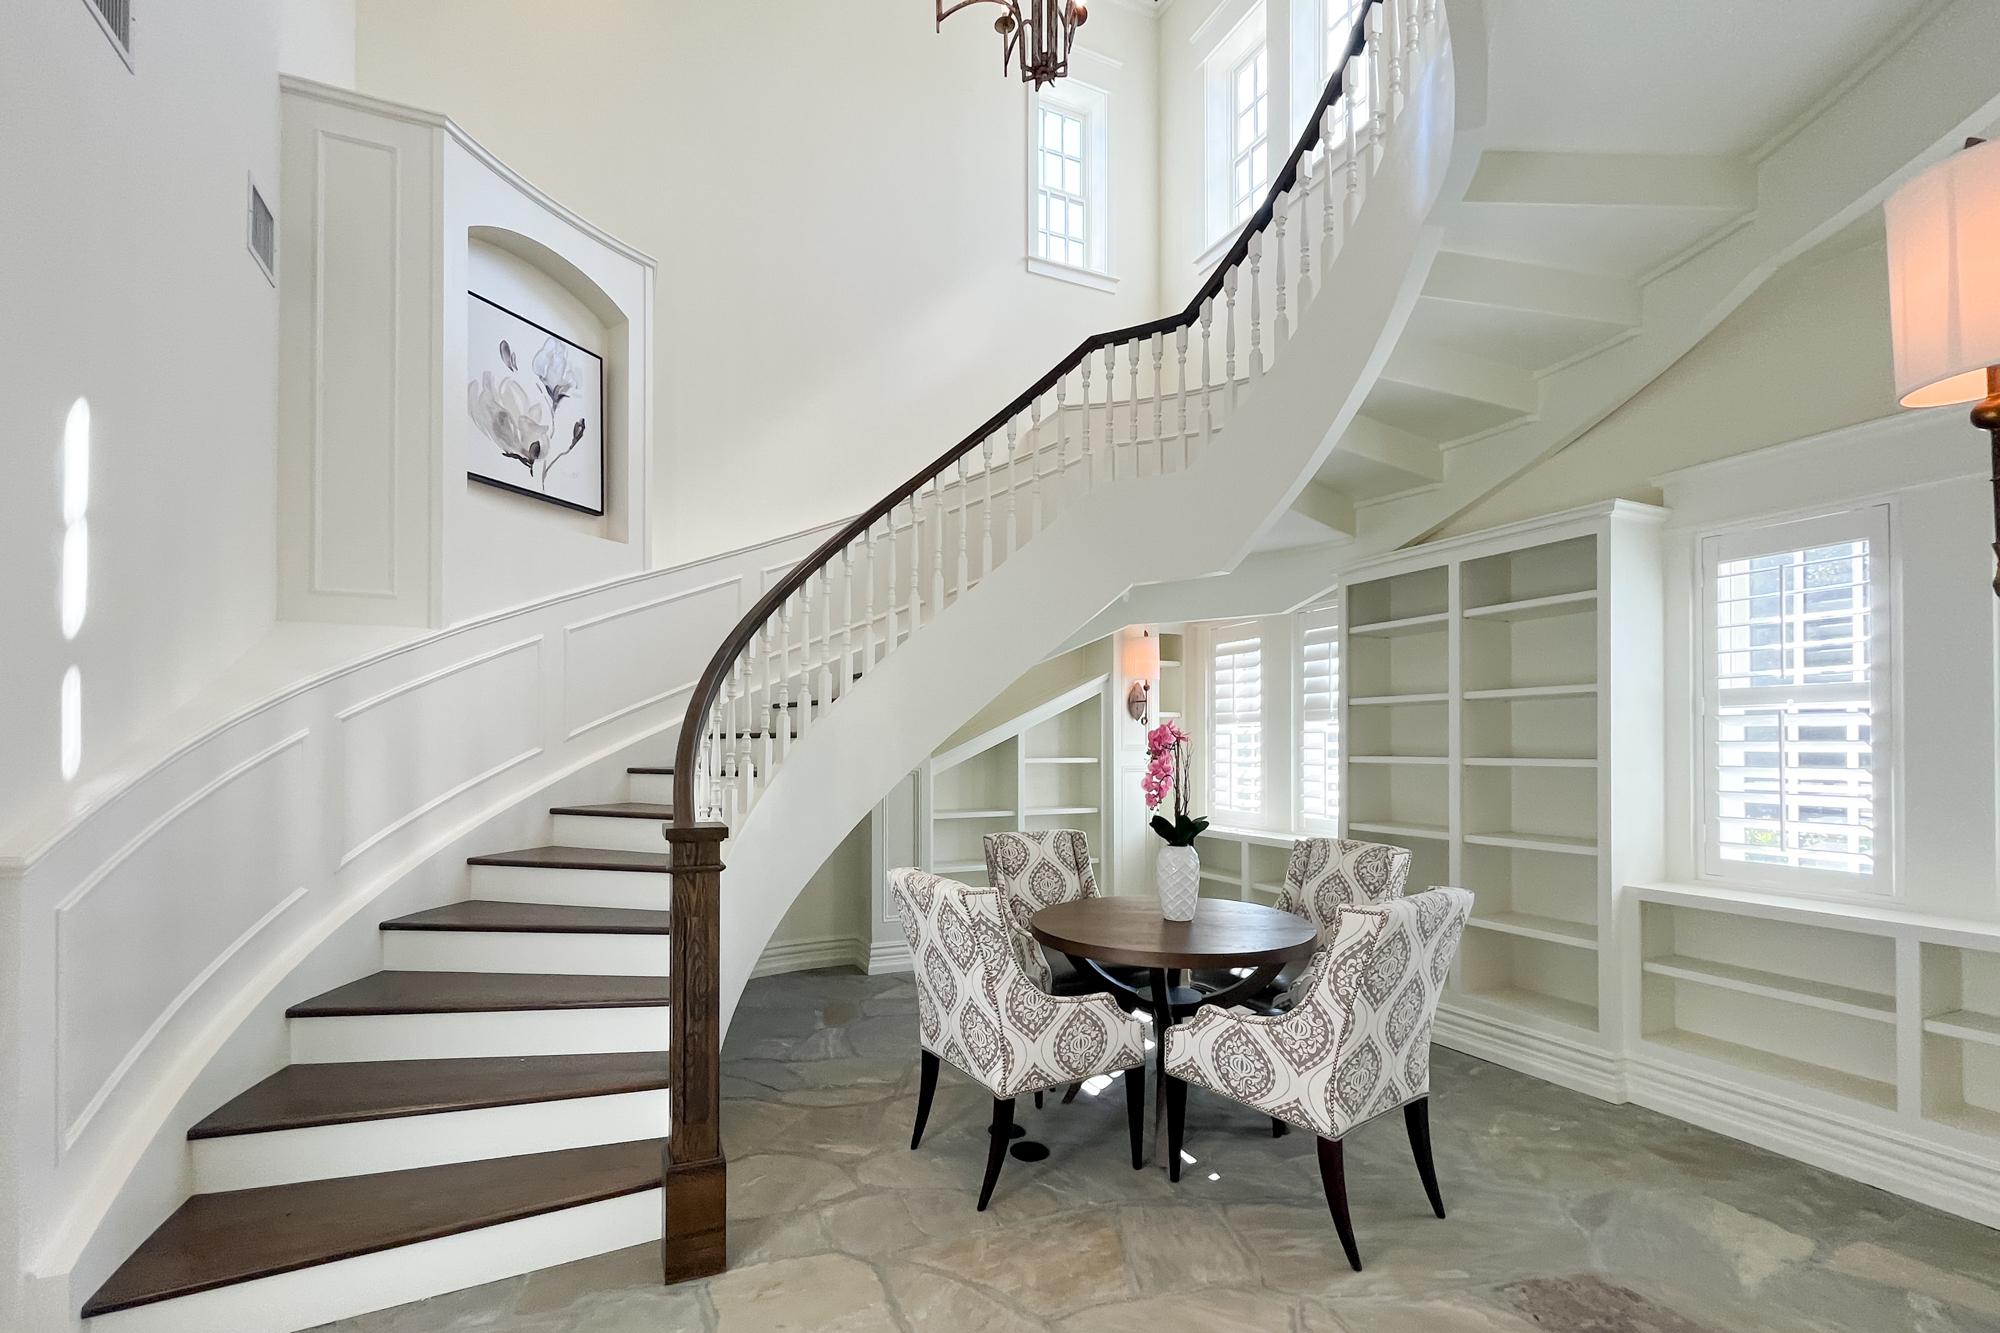 Stair Case - Professional Real Estate Photography - Orlando